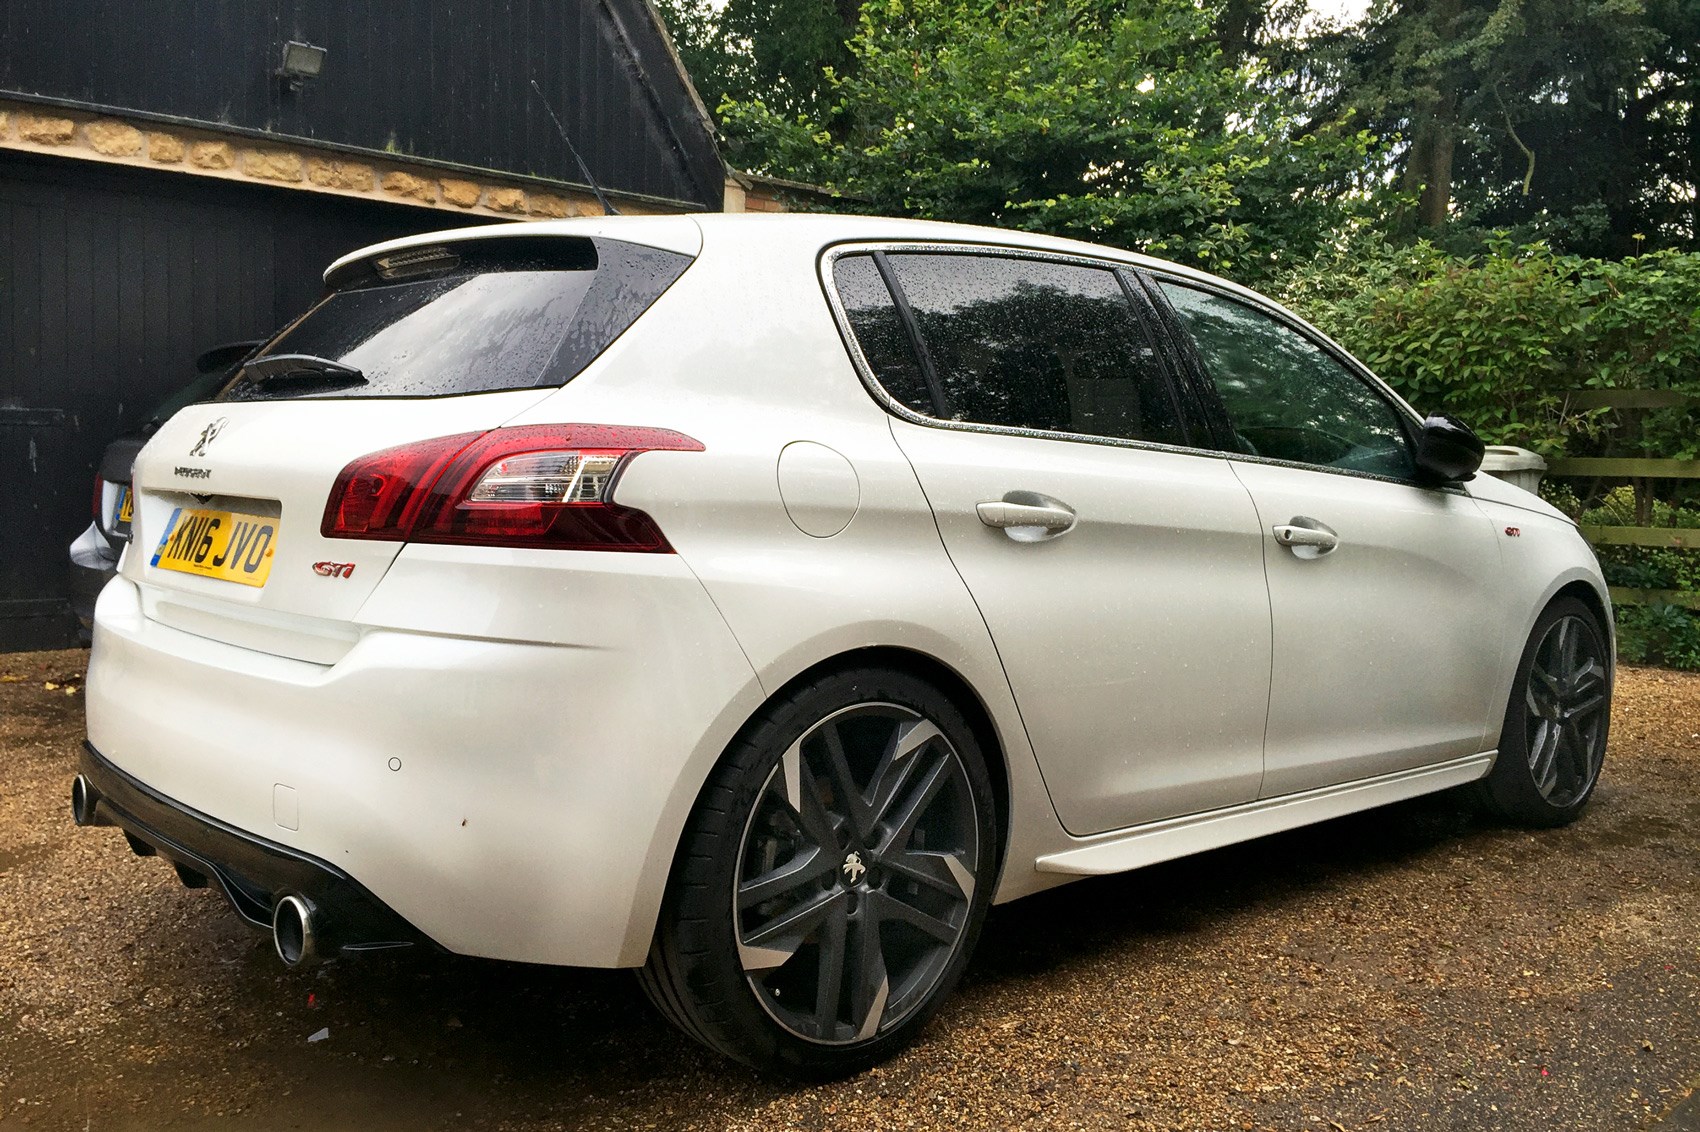 REVIEW - Peugeot 308 GTi THP 270 by Peugeot Sport – Simply Motor